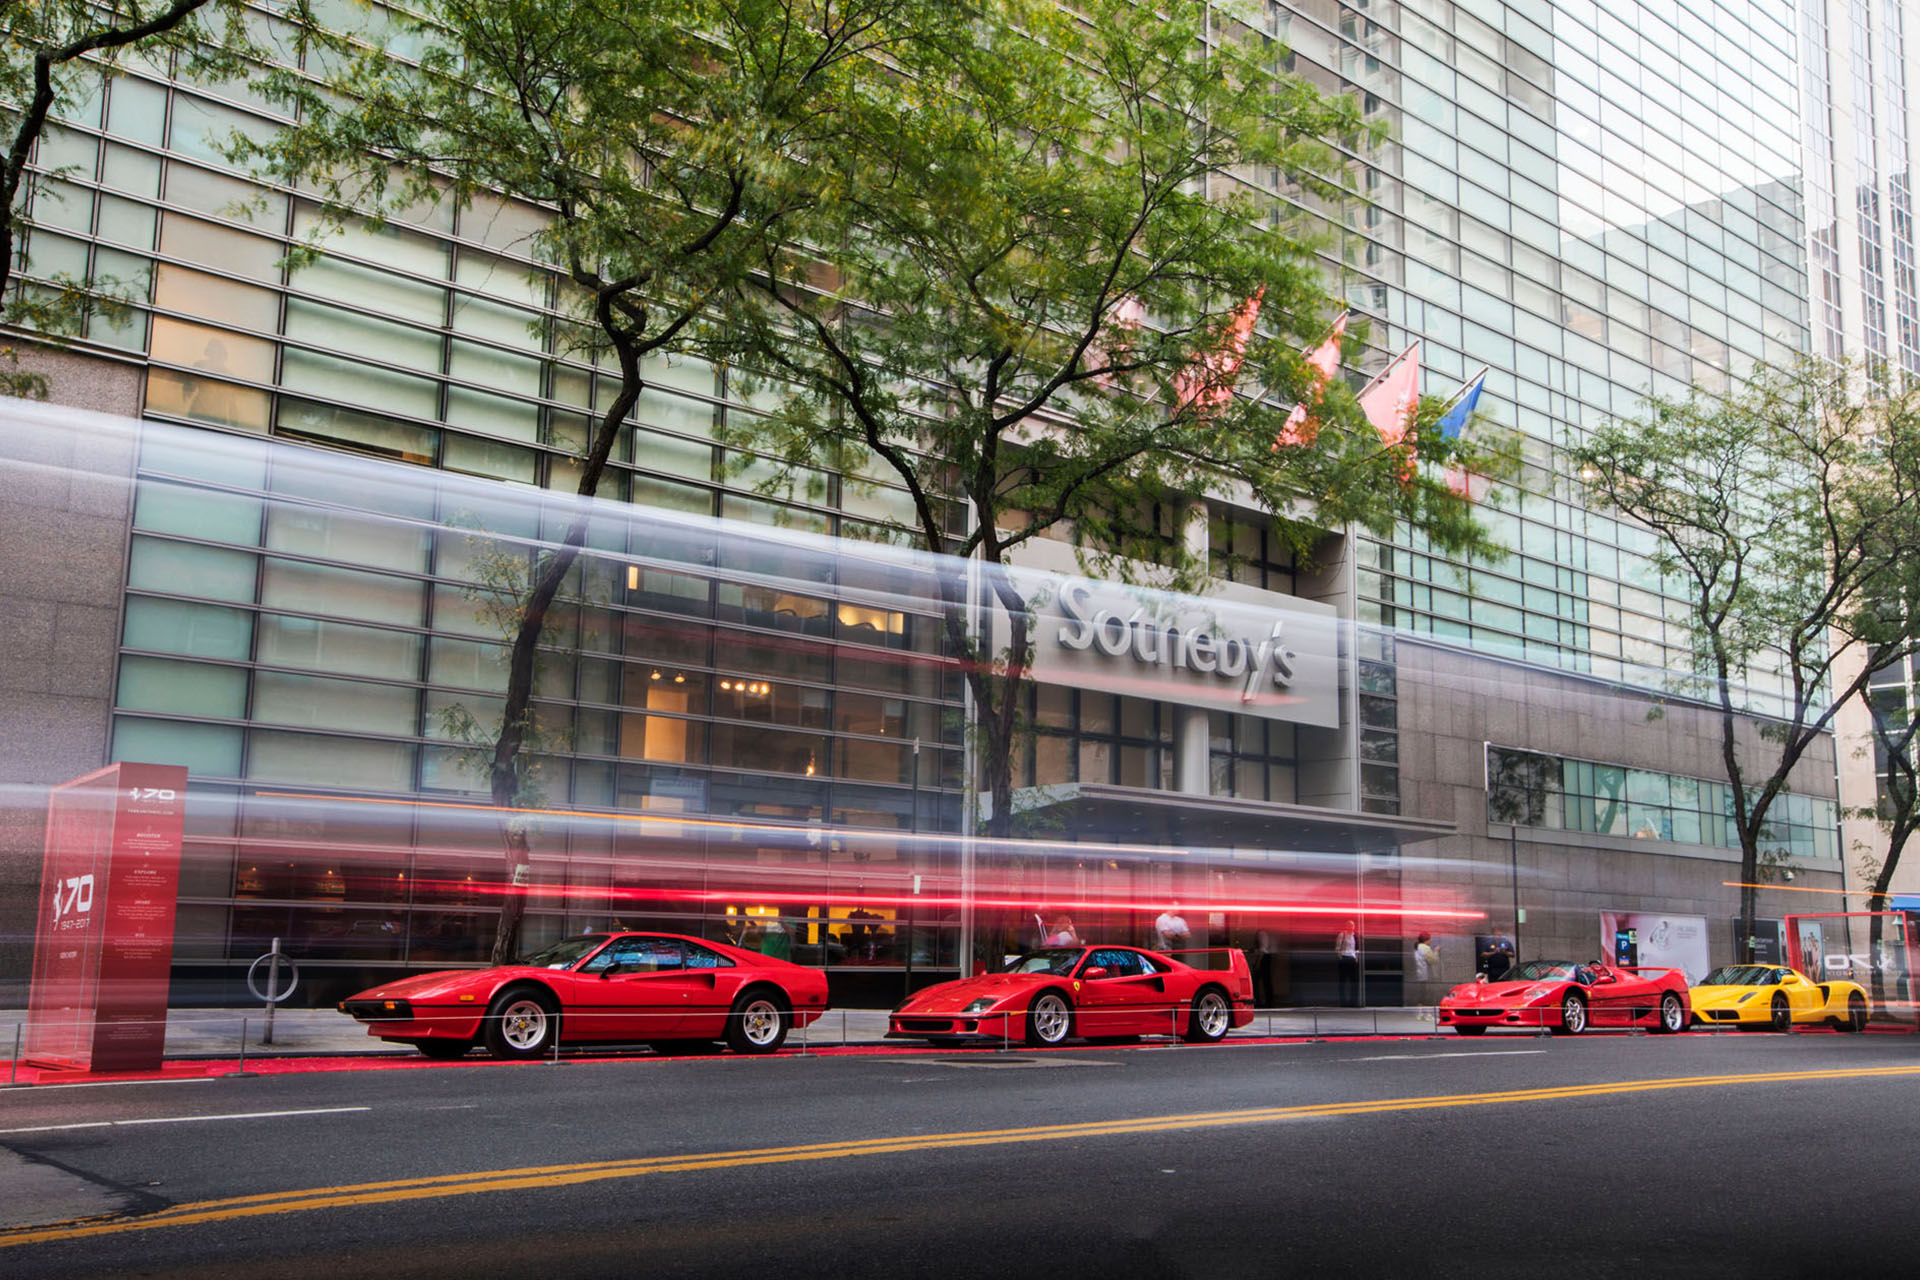 Ferrari's parked in front of Sotheby's